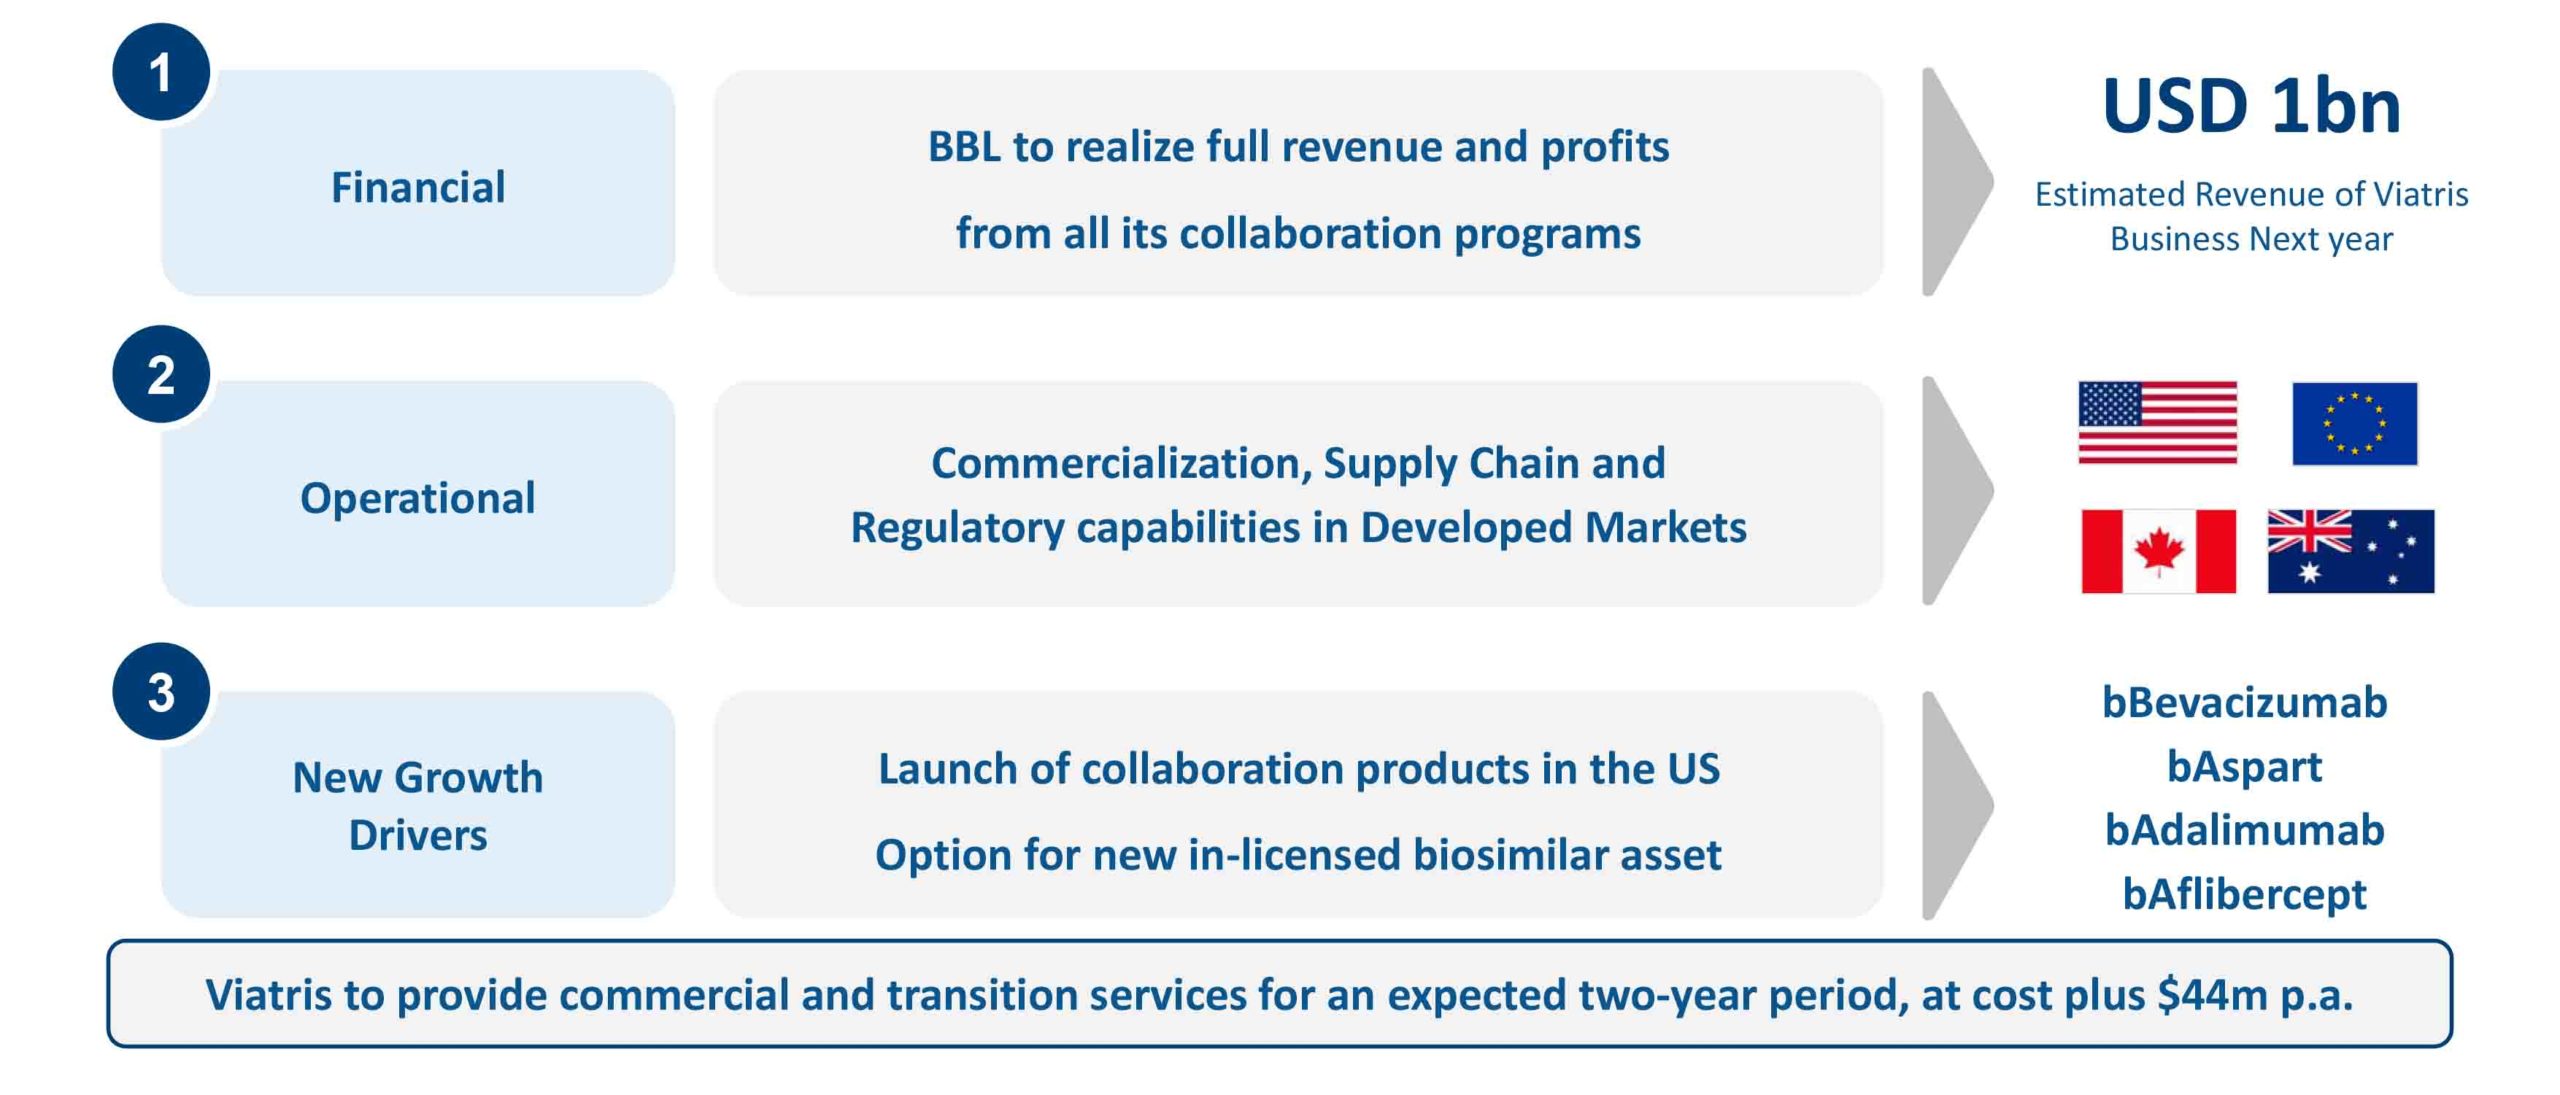 Acquired Biosimilars Business to Add Financial Depth and Commercial Capabilities